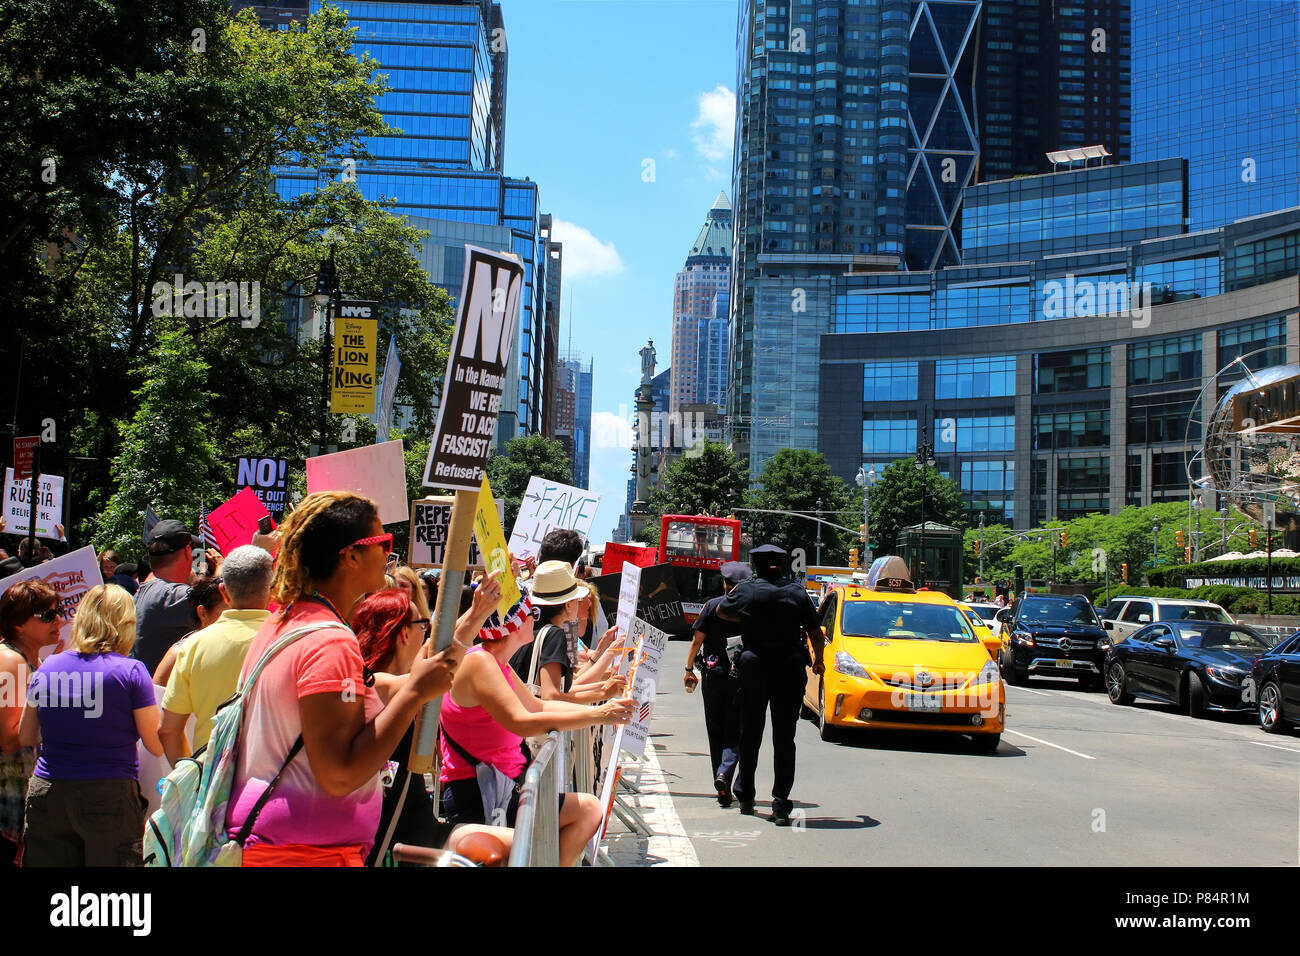 NEW YORK, NY - JULY 02: Activists rally at a Rise and Resist organized Trump Impeachment protest in front of the Trump International Hotel & Tower. Stock Photo